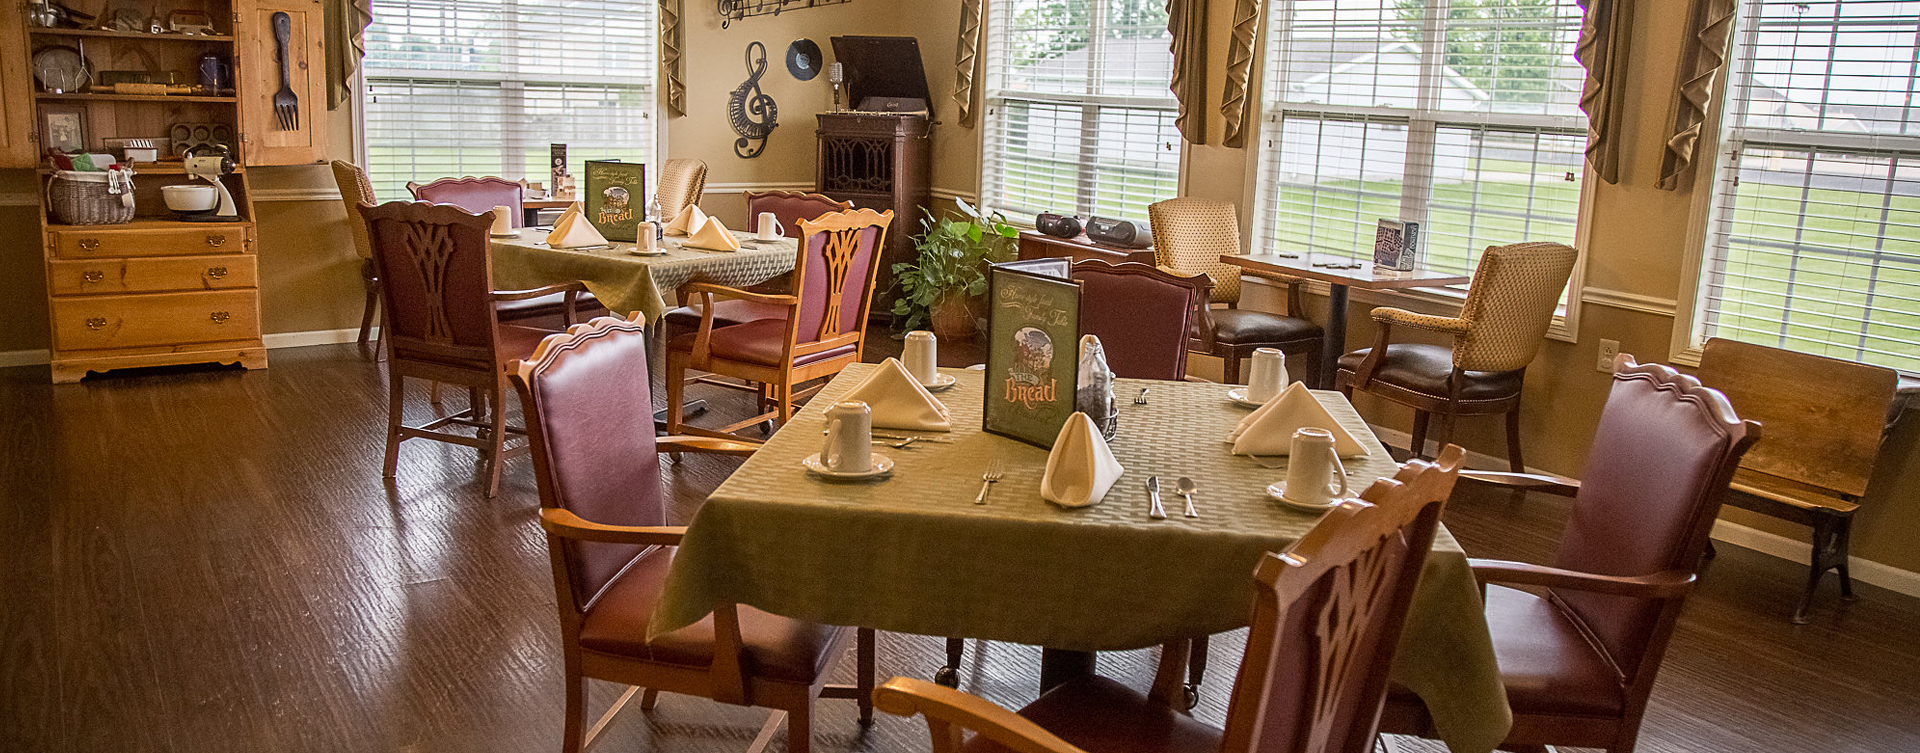 Mary B’s country kitchen evokes a sense of home and reconnects residents to past life skills at Bickford of Burlington